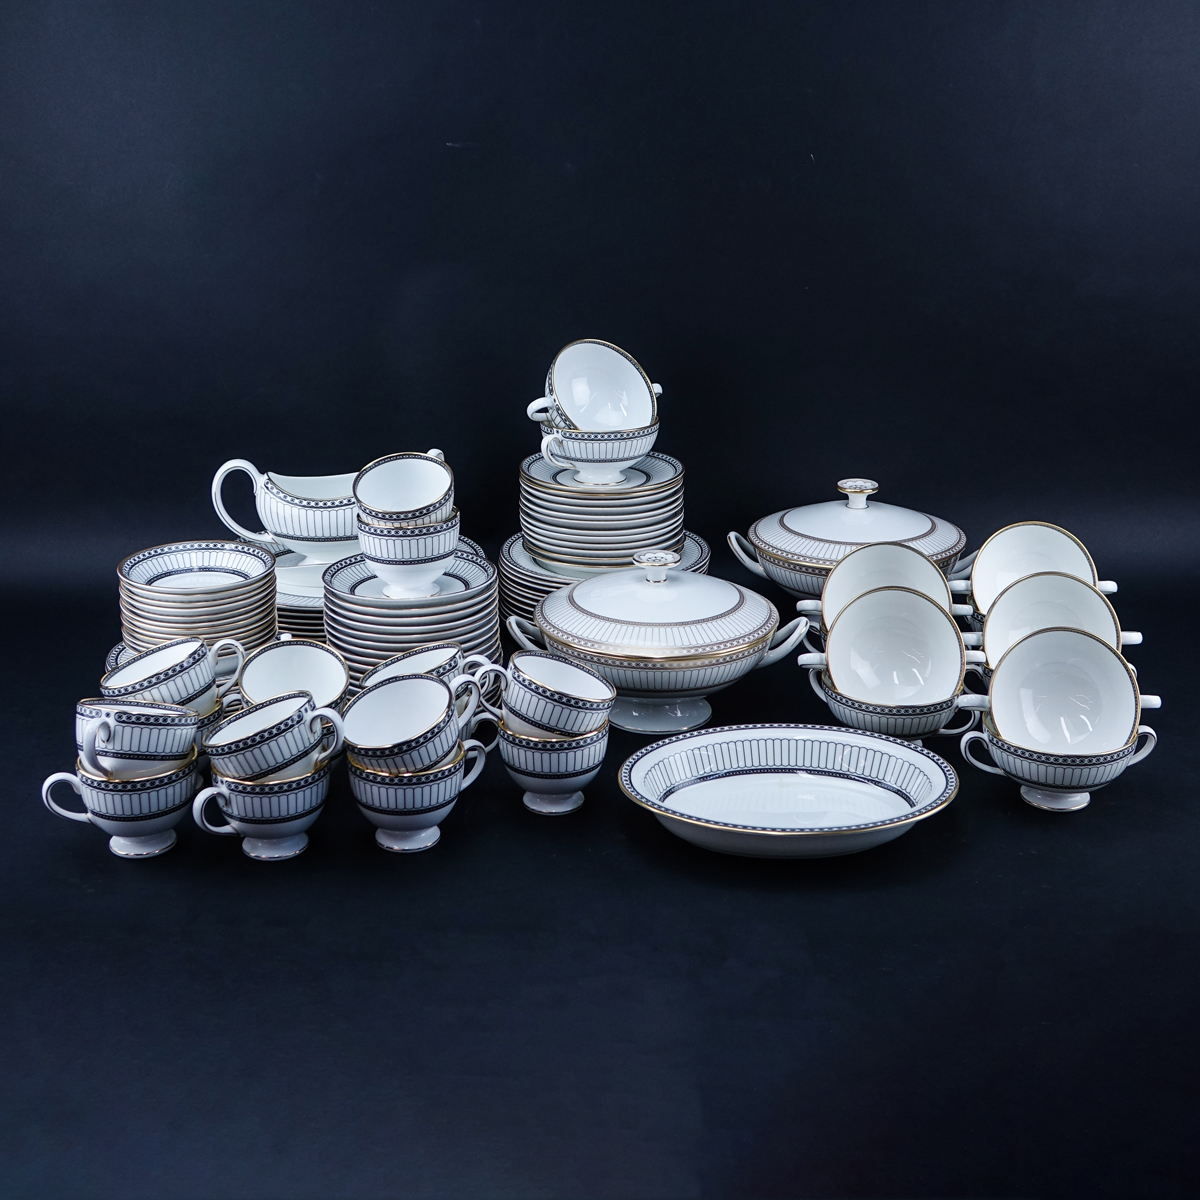 One Hundred Nine (109) Piece Wedgwood Colonnade Dinnerware. Includes in black: 12 plates 10-3/4", 12 salad plates, 12 bread & butter plates, 12 fruit bowls, 12 handled soup cups and 12 saucers, 16 ups and 16 saucers, gravy boat, 2 open serving dishes.